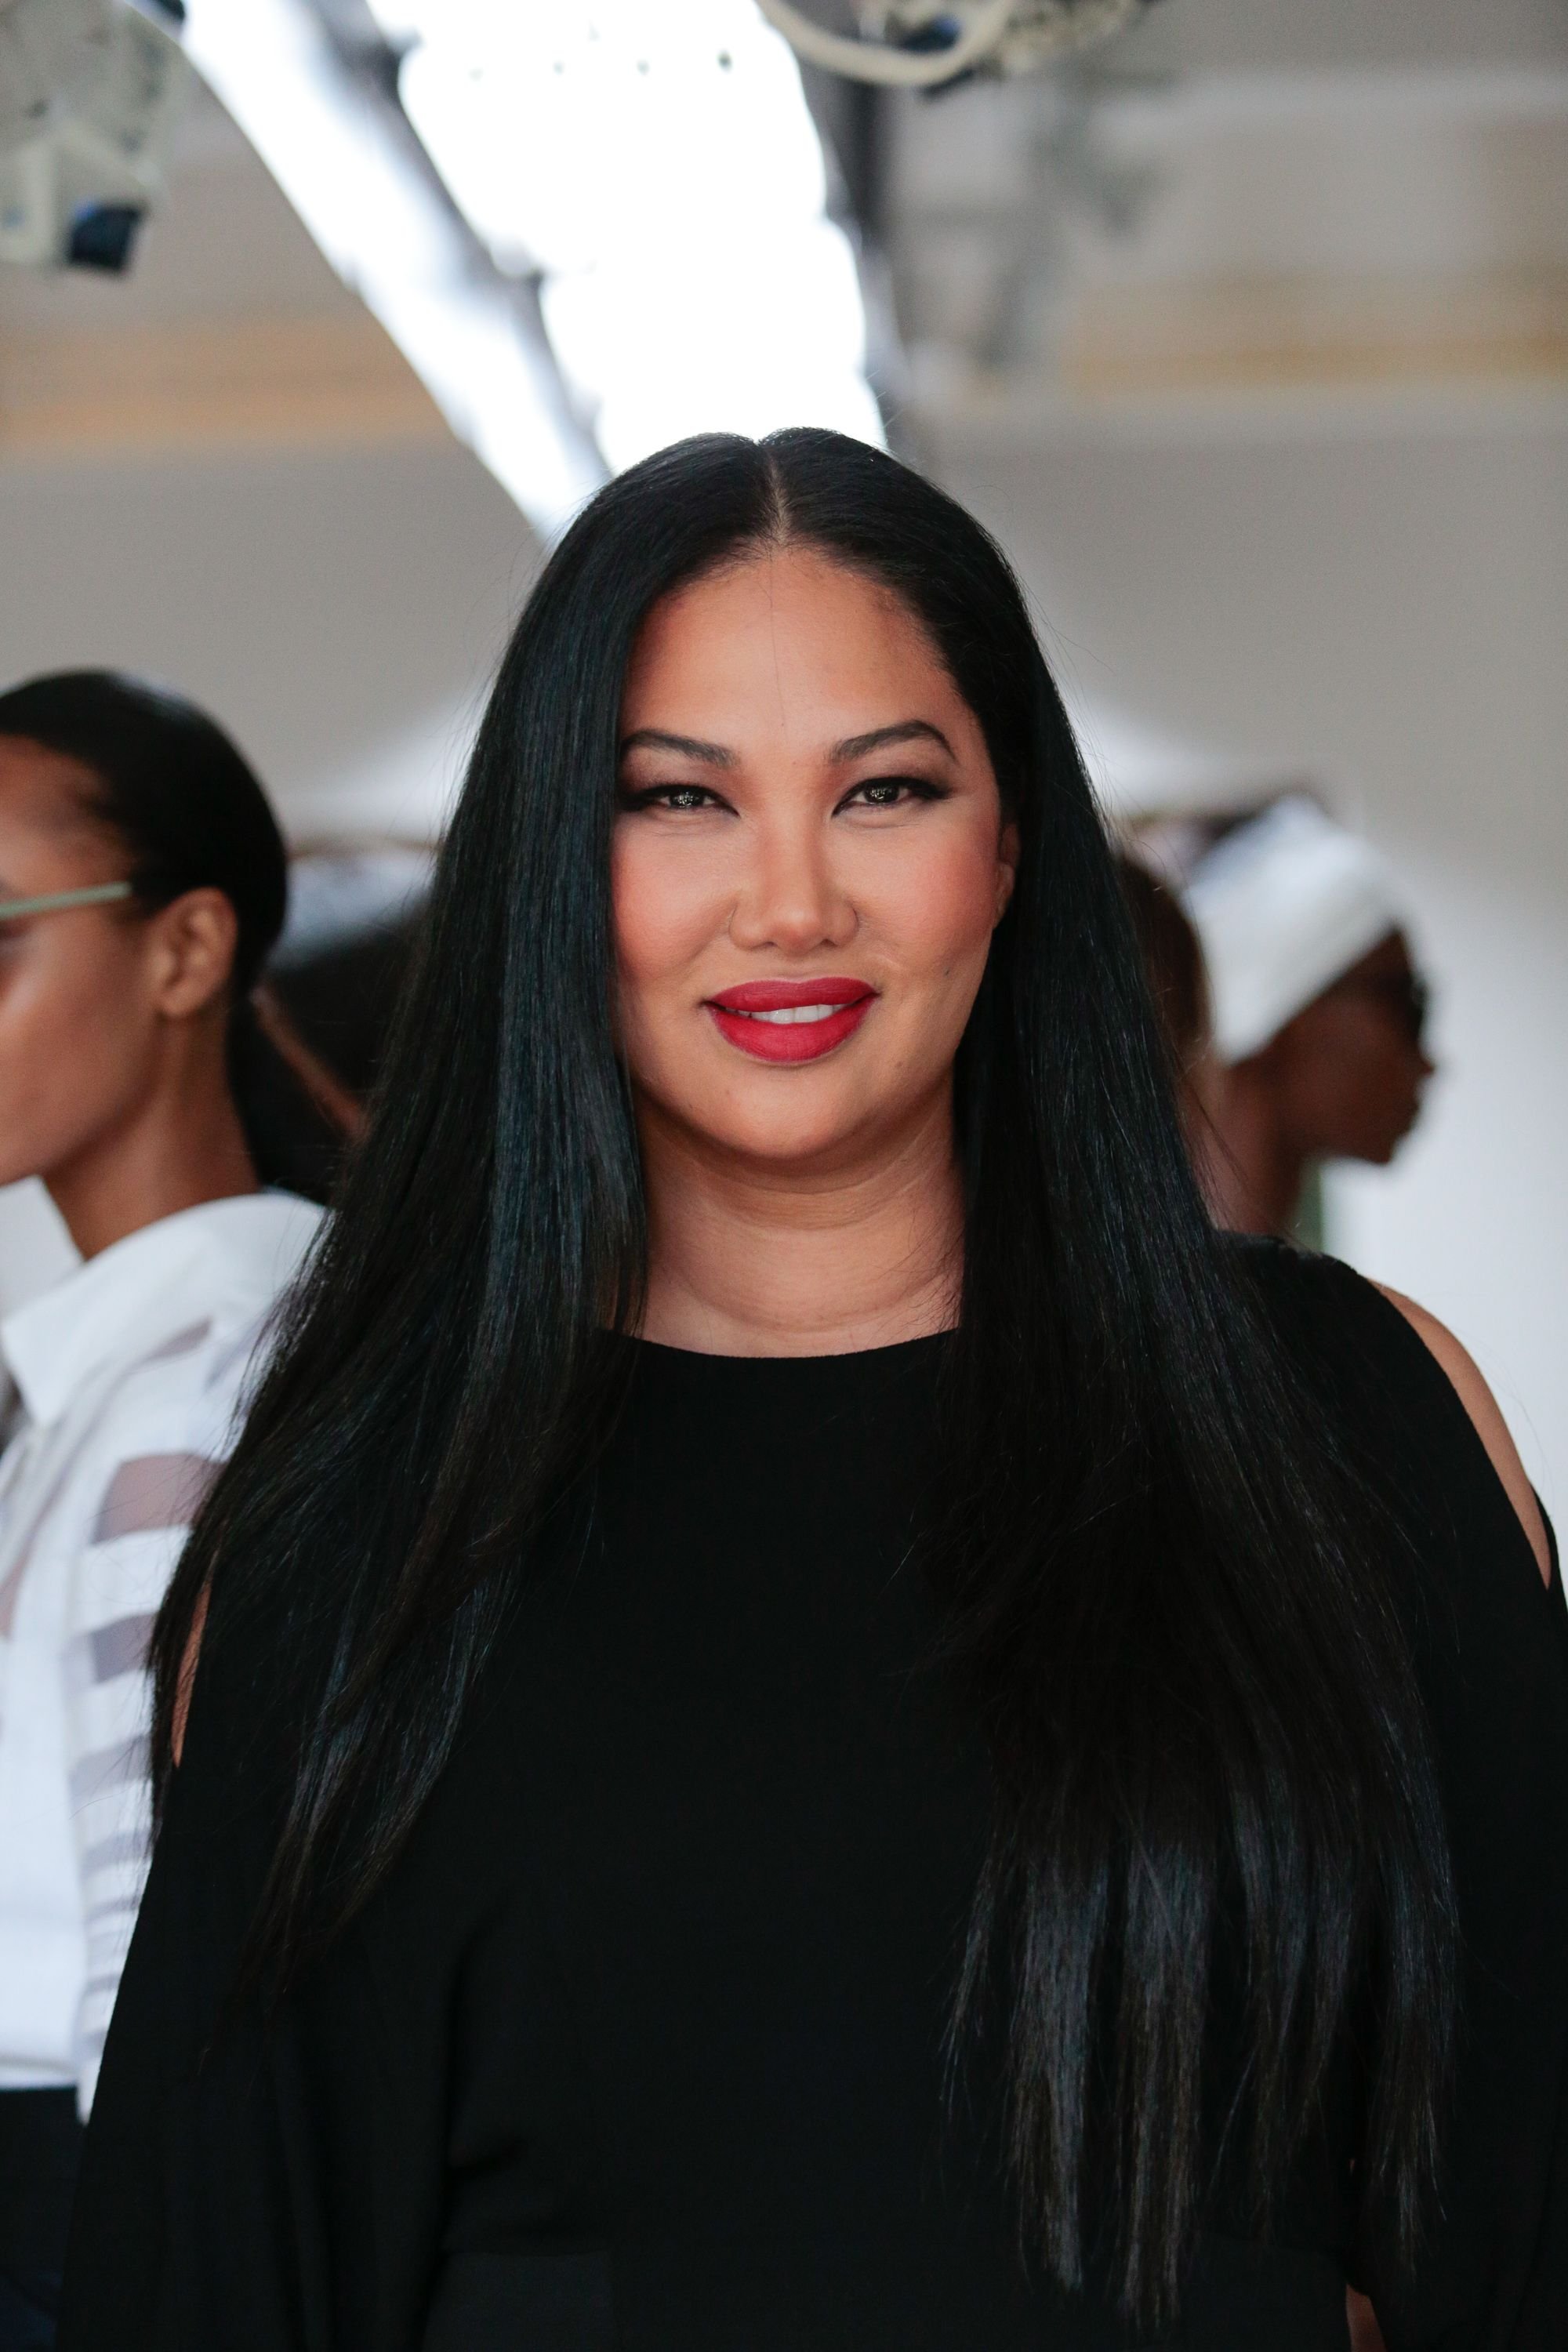 Kimora Lee Simmons during New York Fashion Week at The Gallery, Skylight at Clarkson Sq on September 14, 2016. | Photo: Getty Images